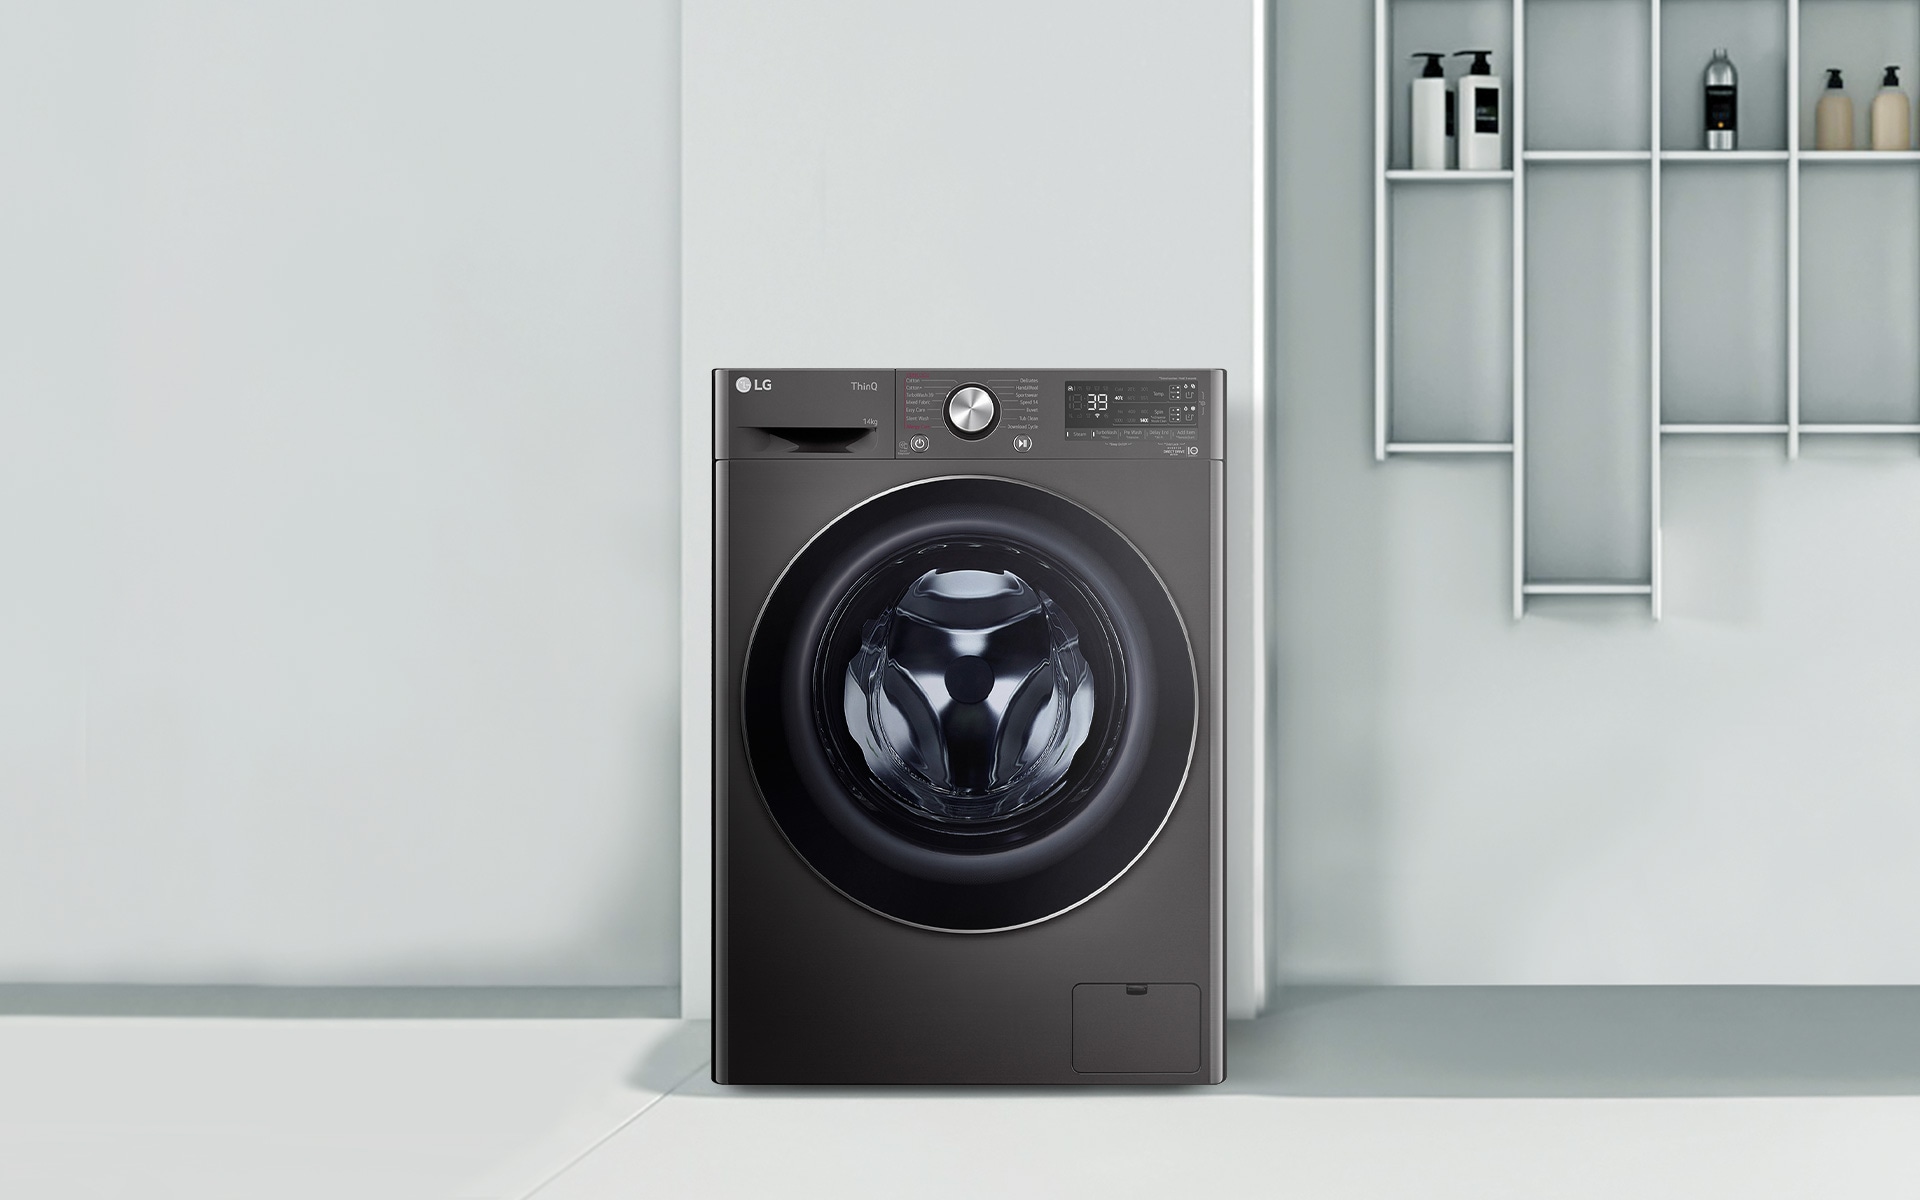 https://www.lg.com/my/lg-experience/how-to-clean-washing-machine/assets/FrontLoad-lifestyle-cover.jpg